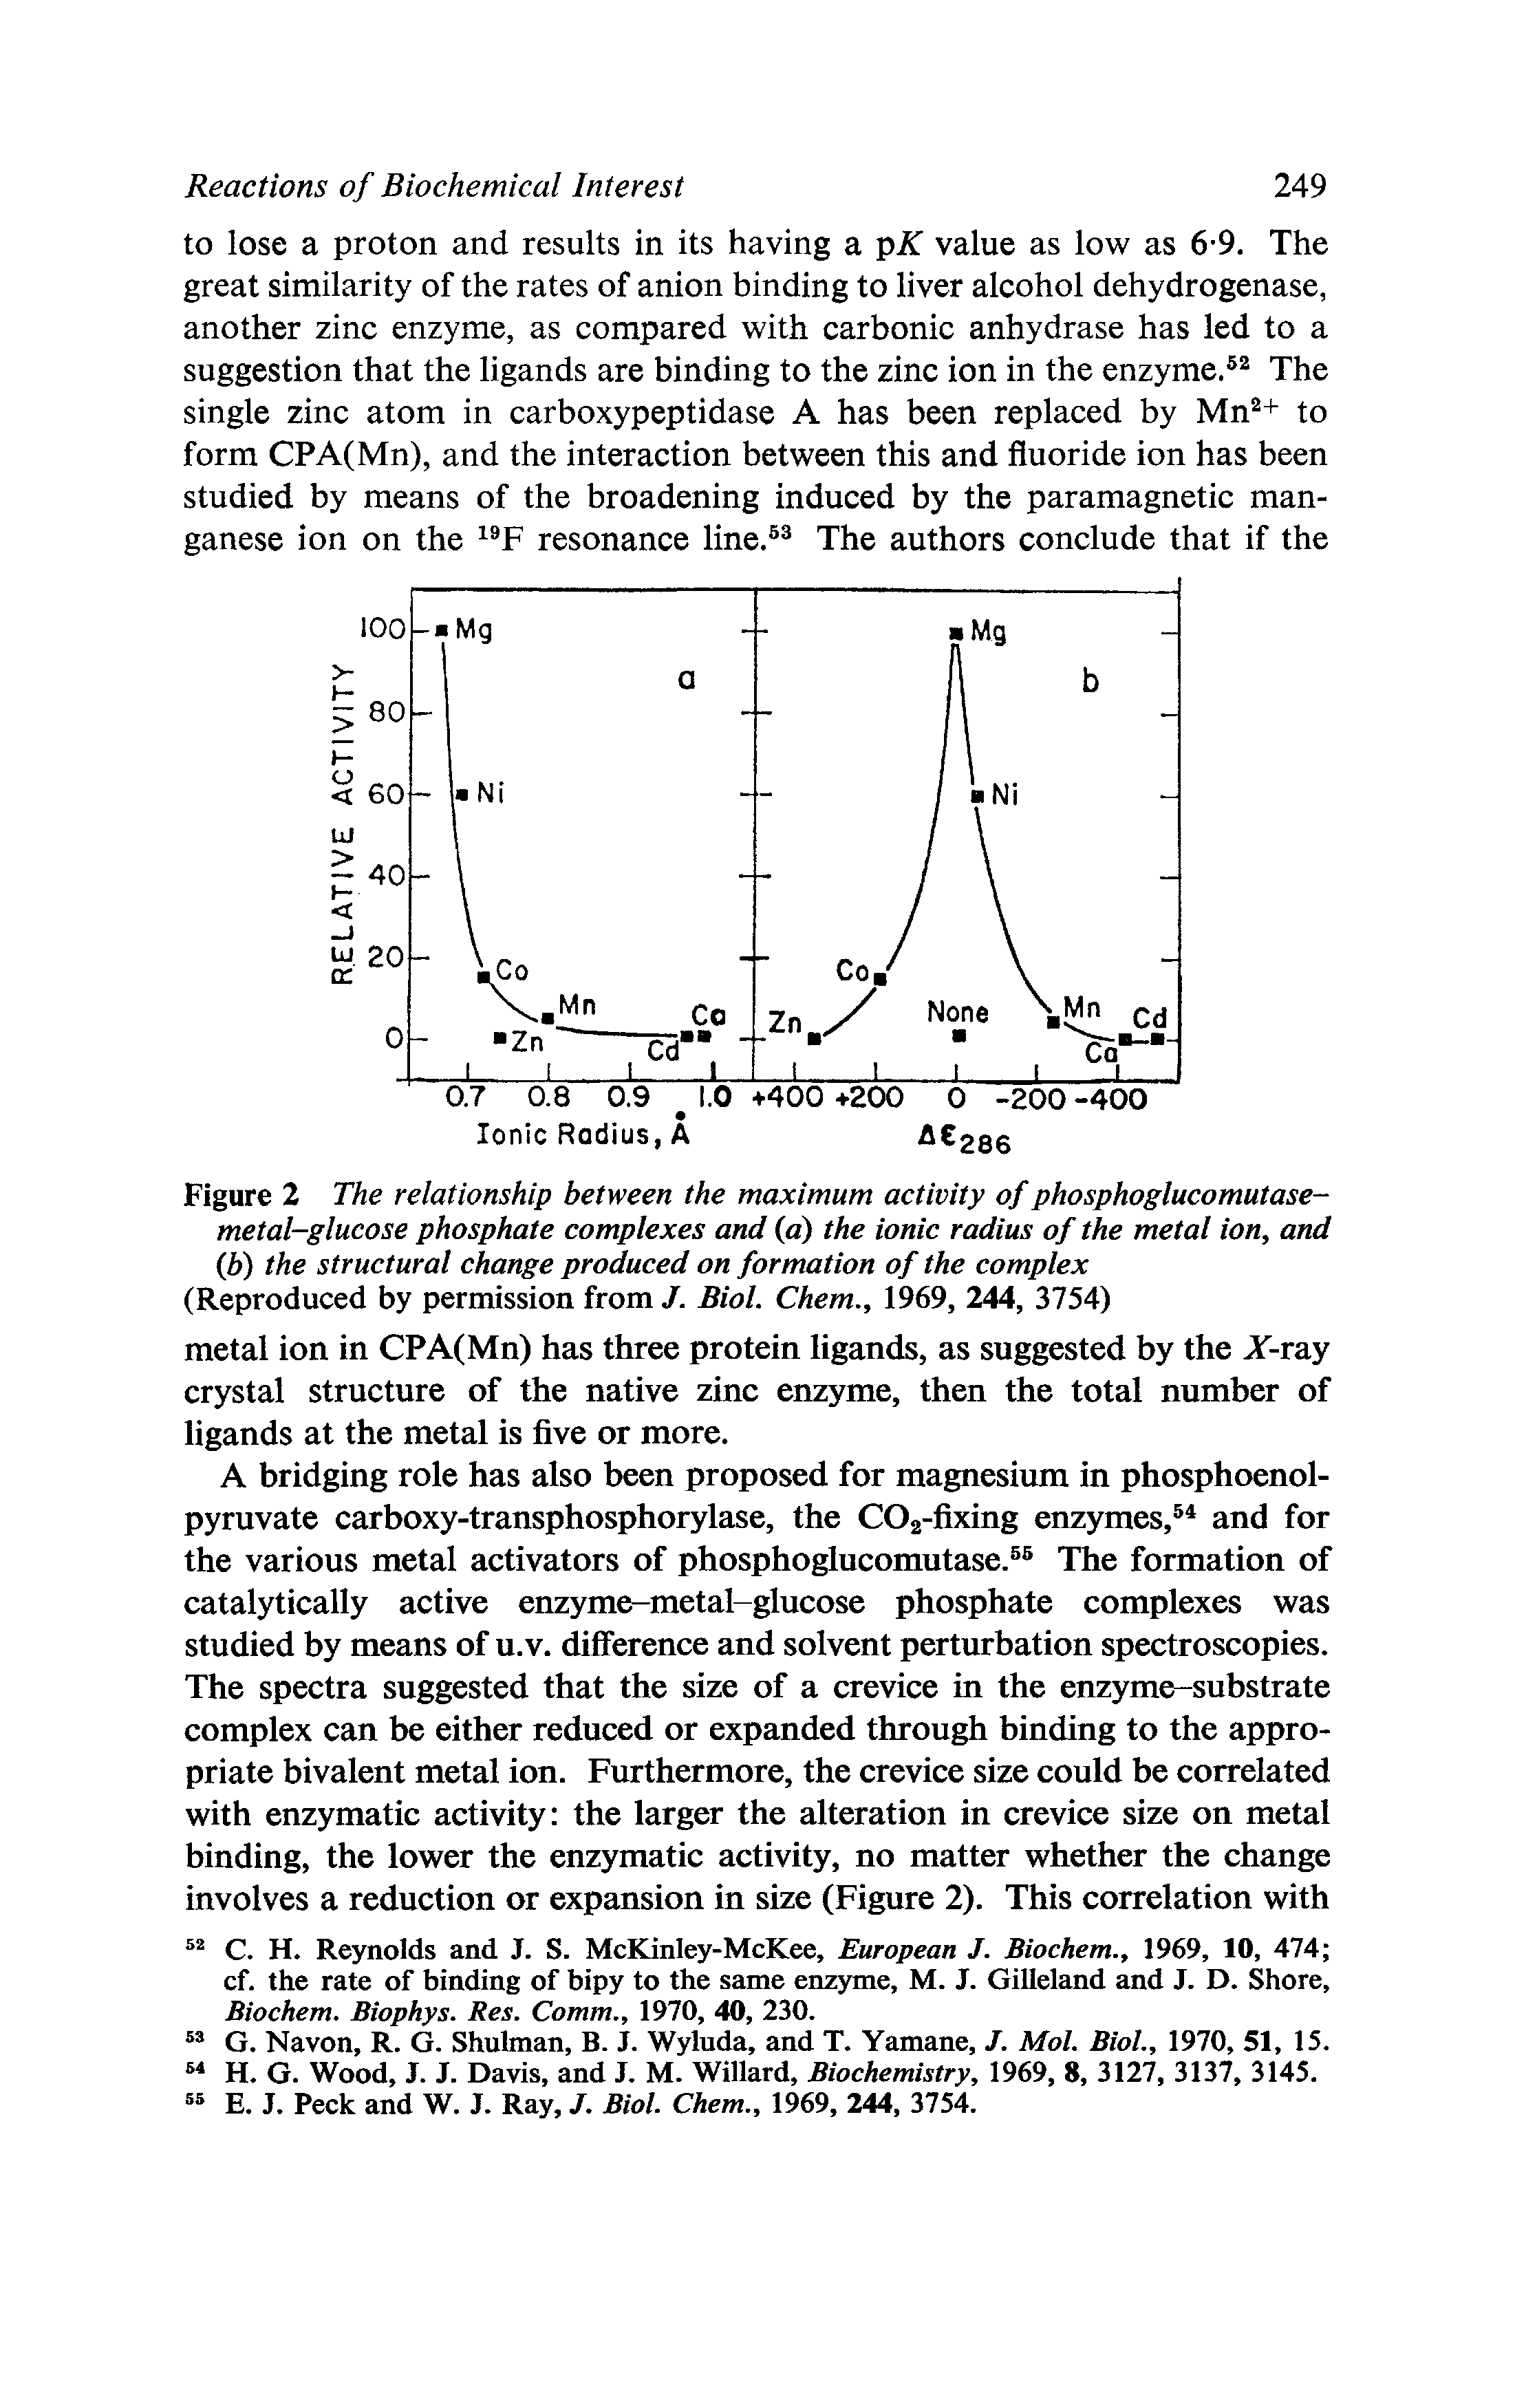 Figure 2 The relationship between the maximum activity of phosphoglucomutase-metal-glucose phosphate complexes and (a) the ionic radius of the metal ion, and (b) the structural change produced on formation of the complex (Reproduced by permission from J. Biol. Chem., 1969, 244, 3754)...